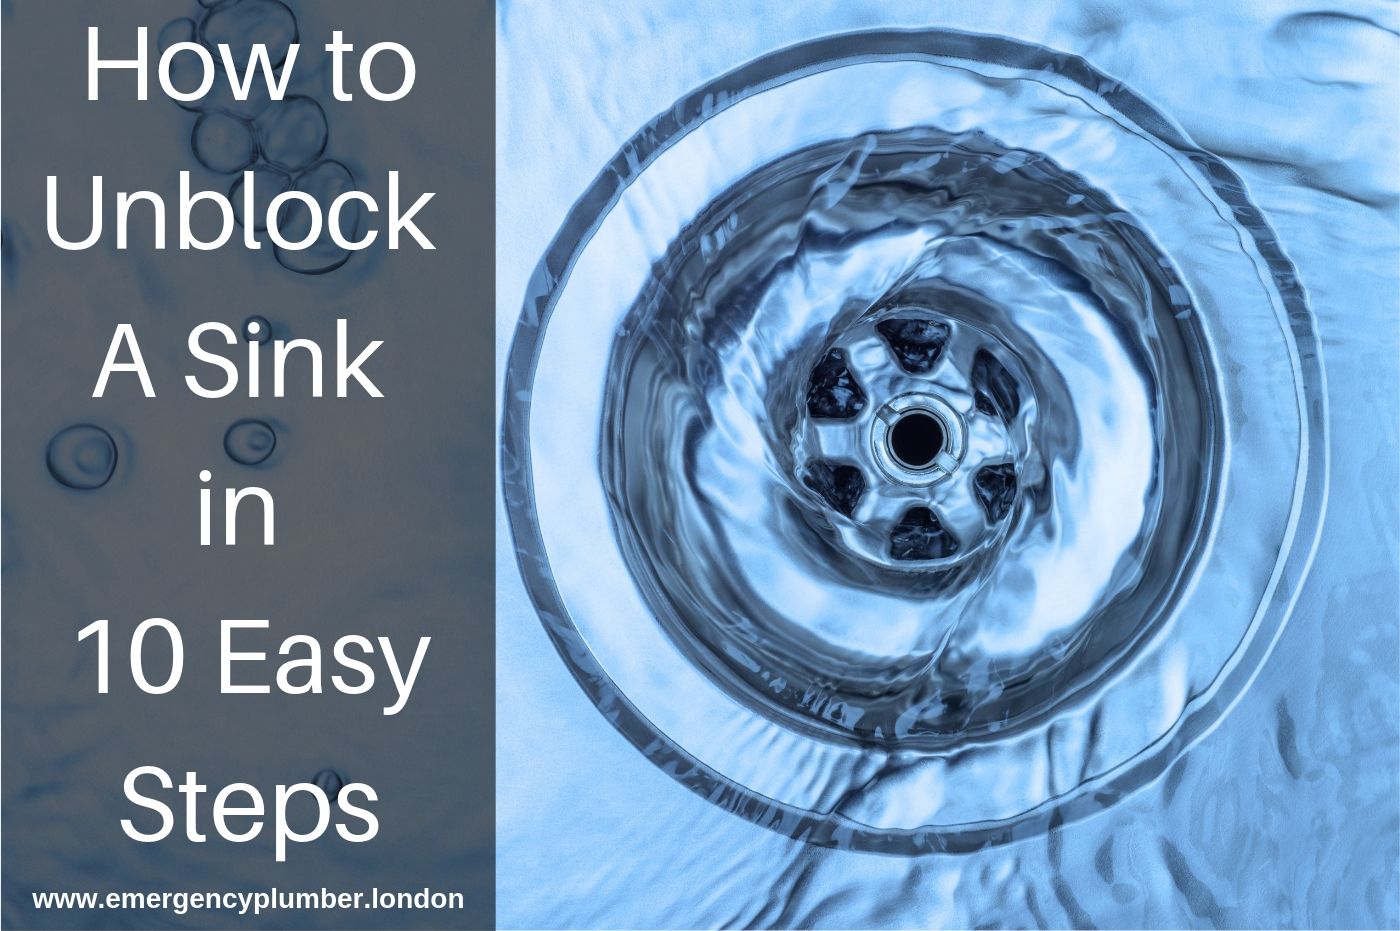 How to unblock a Sink in 10 Easy Steps